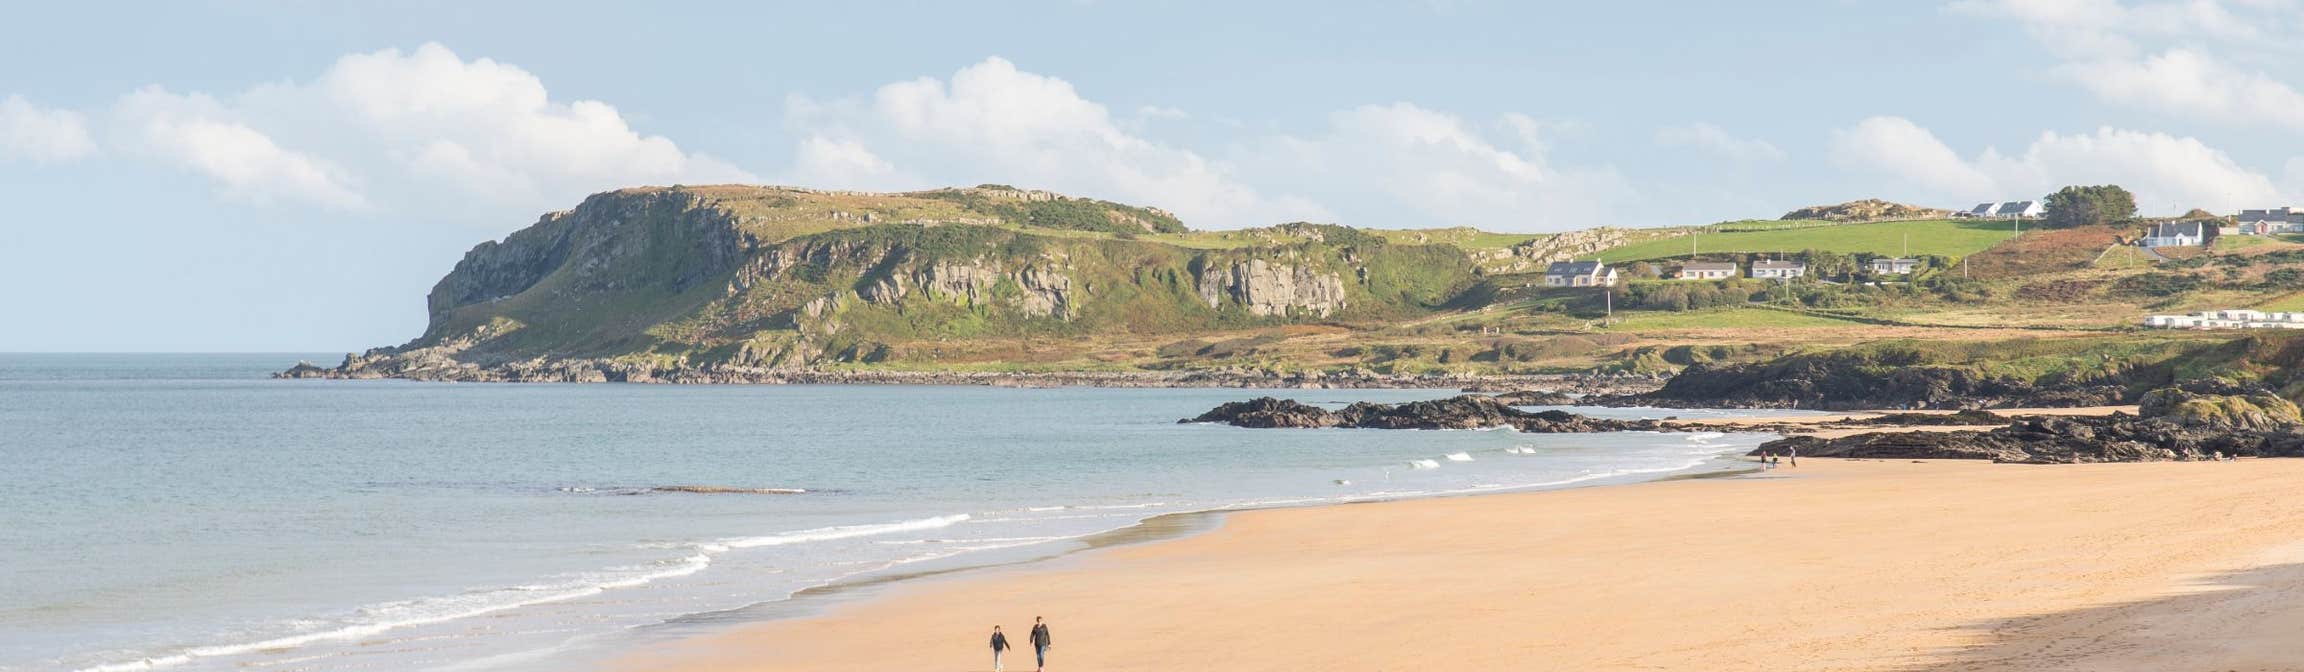 Image of a beach in Culdaff in County Mayo